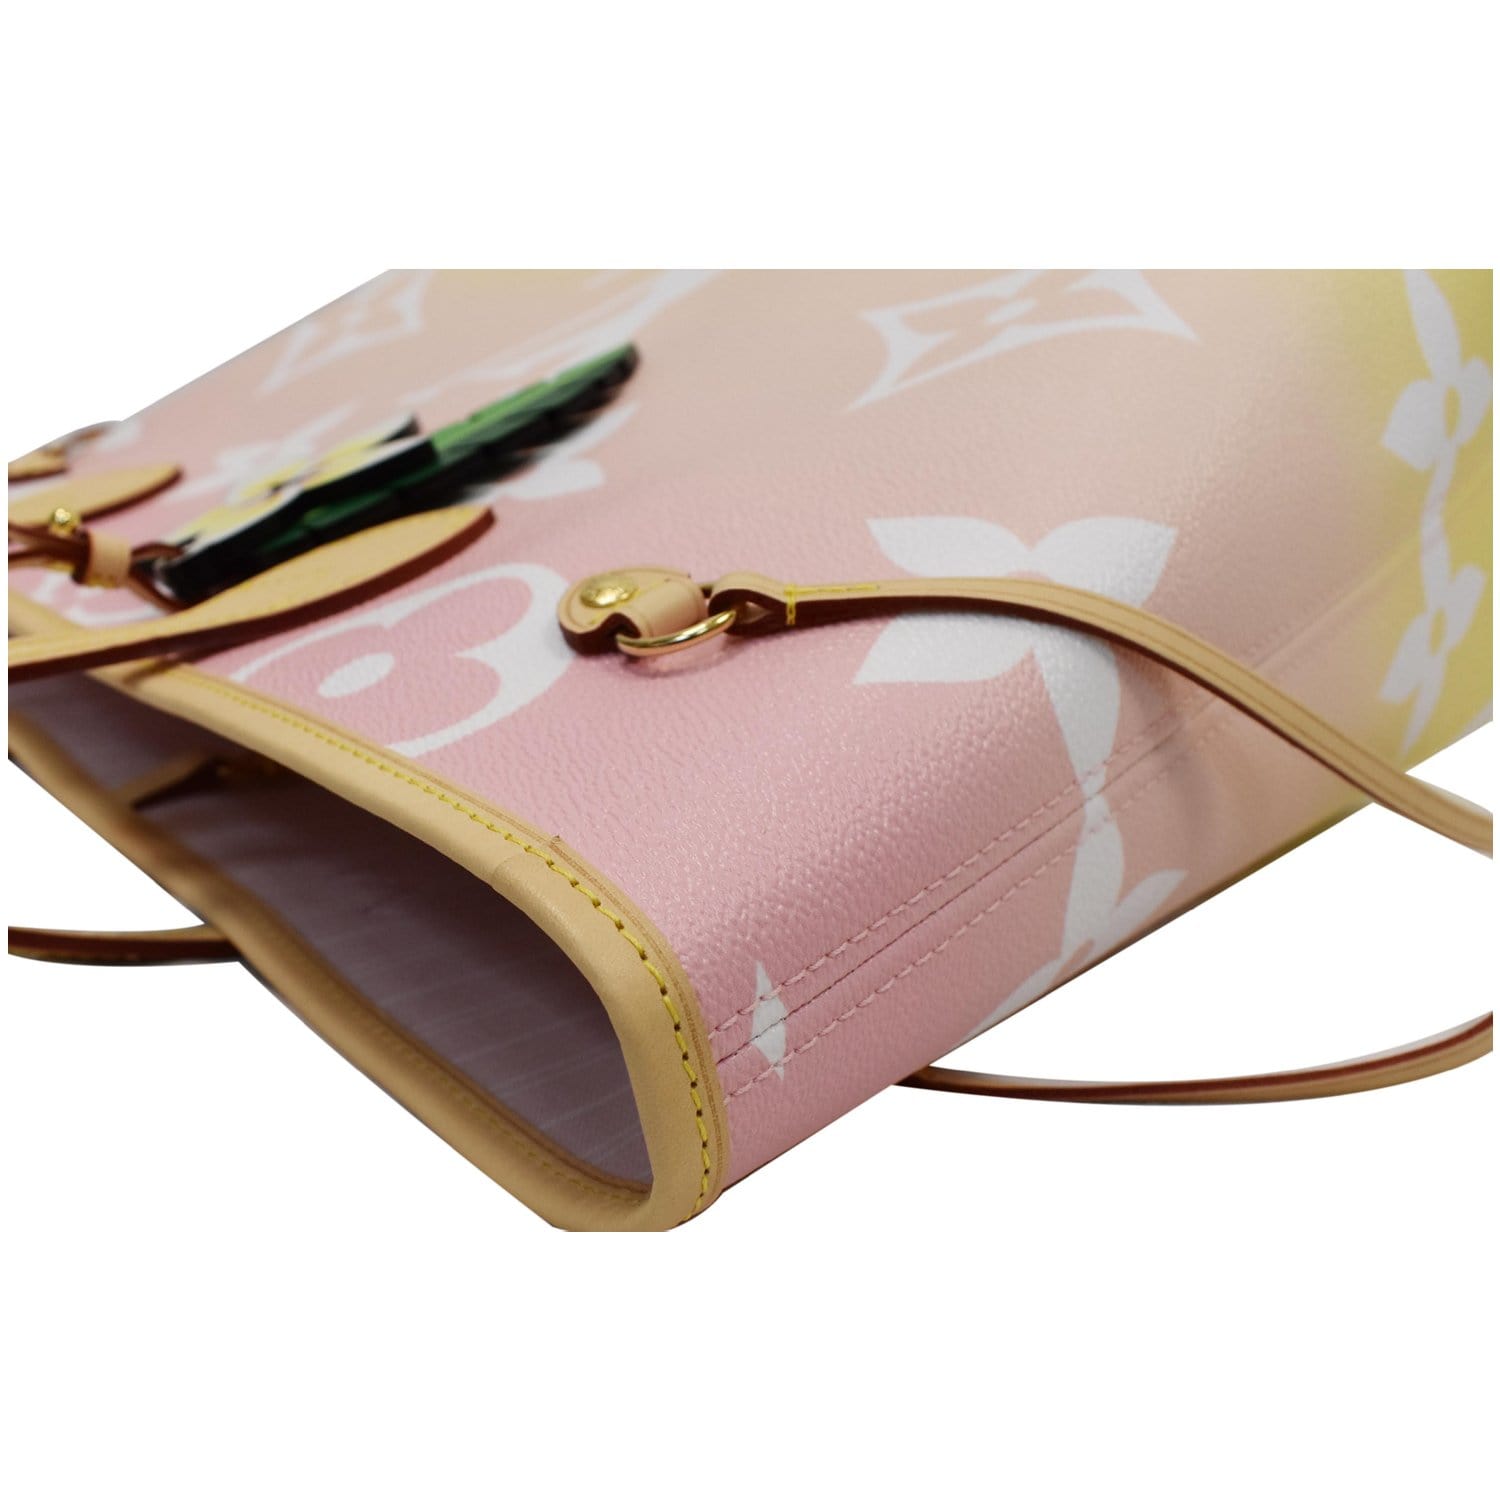 NEW Louis Vuitton Neverfull MM Monogram By The Pool Giant Pink Limited